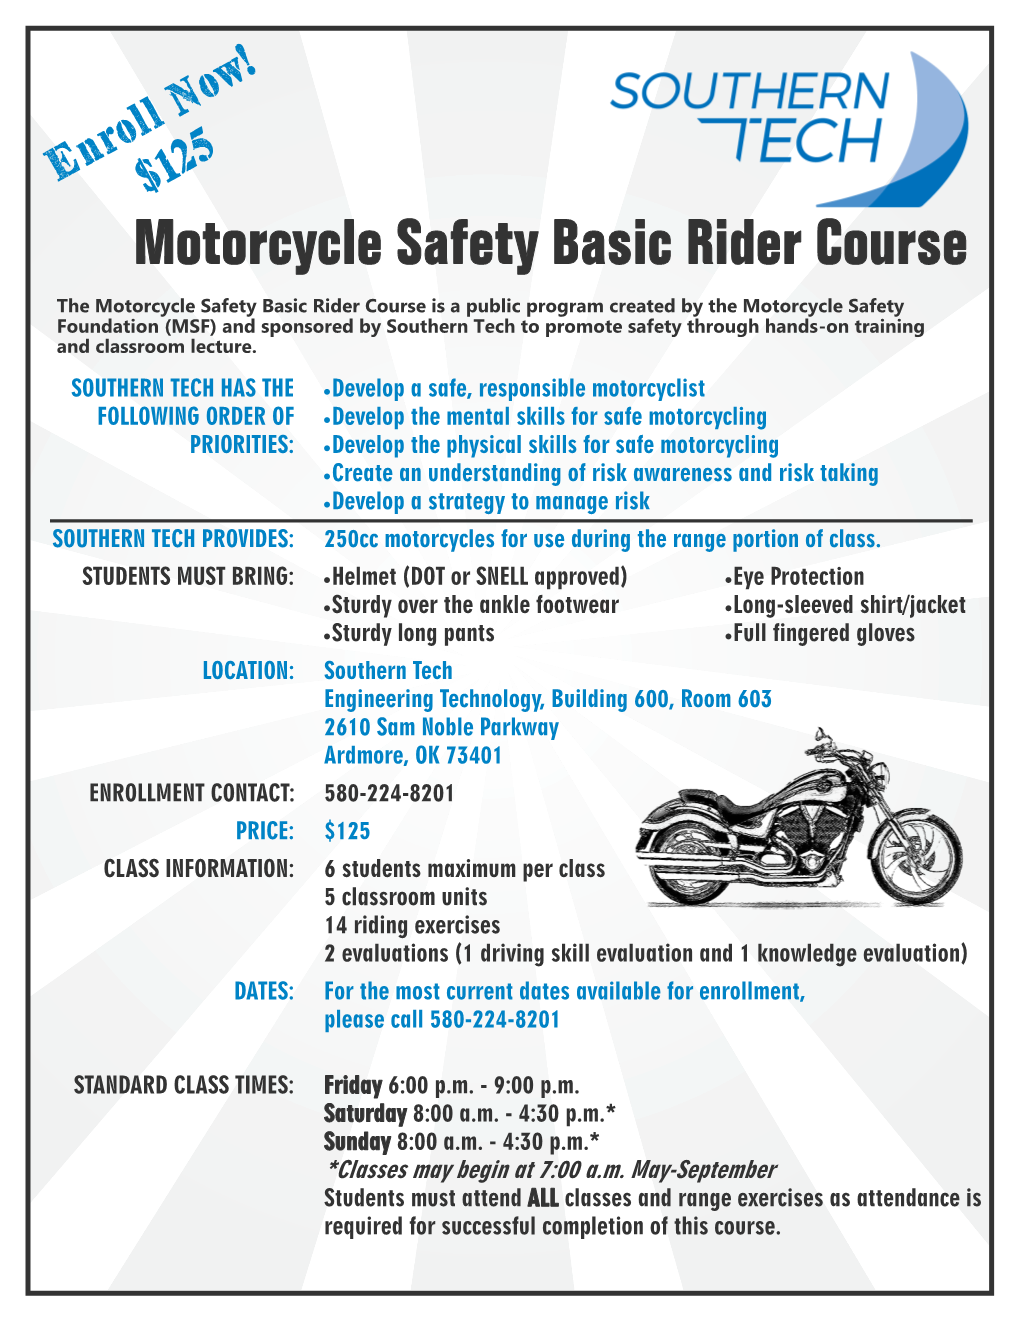 Motorcycle Safety Basic Rider Course